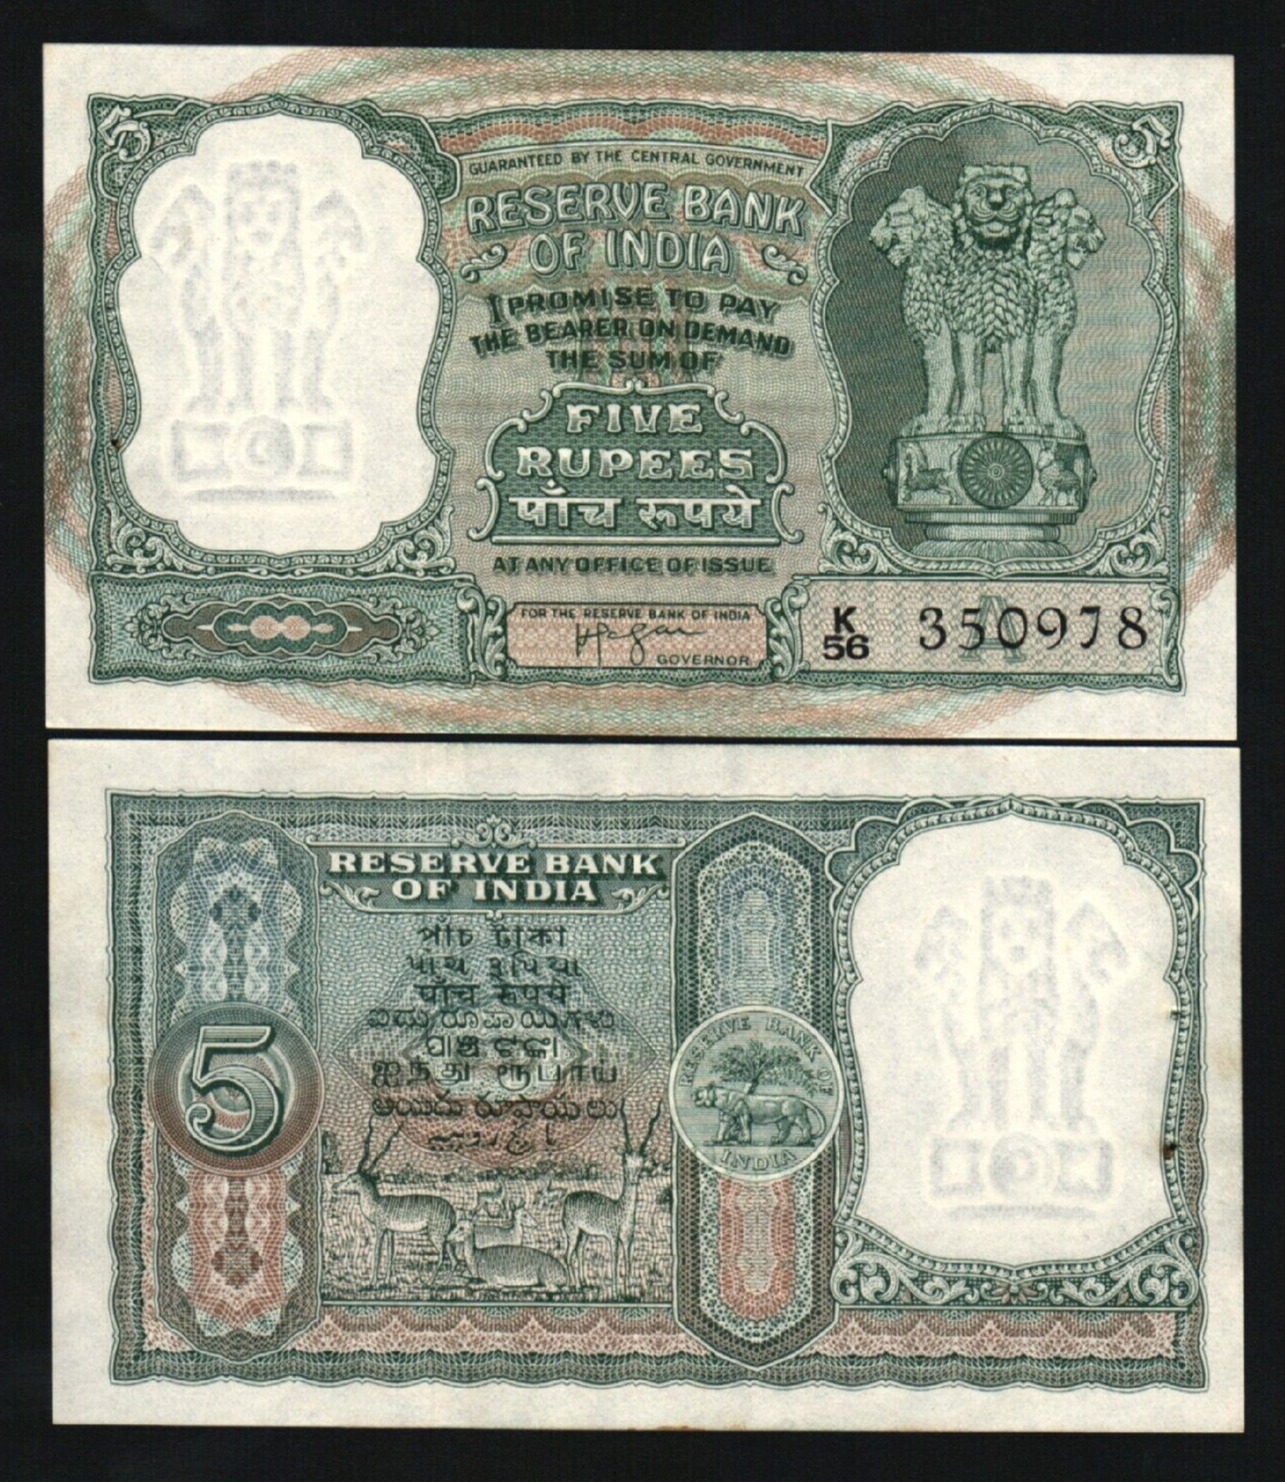 India 5 RUPEES P-35B ND 1957 Indian Antelope UNC World Currency ANIMAL BANK NOTE